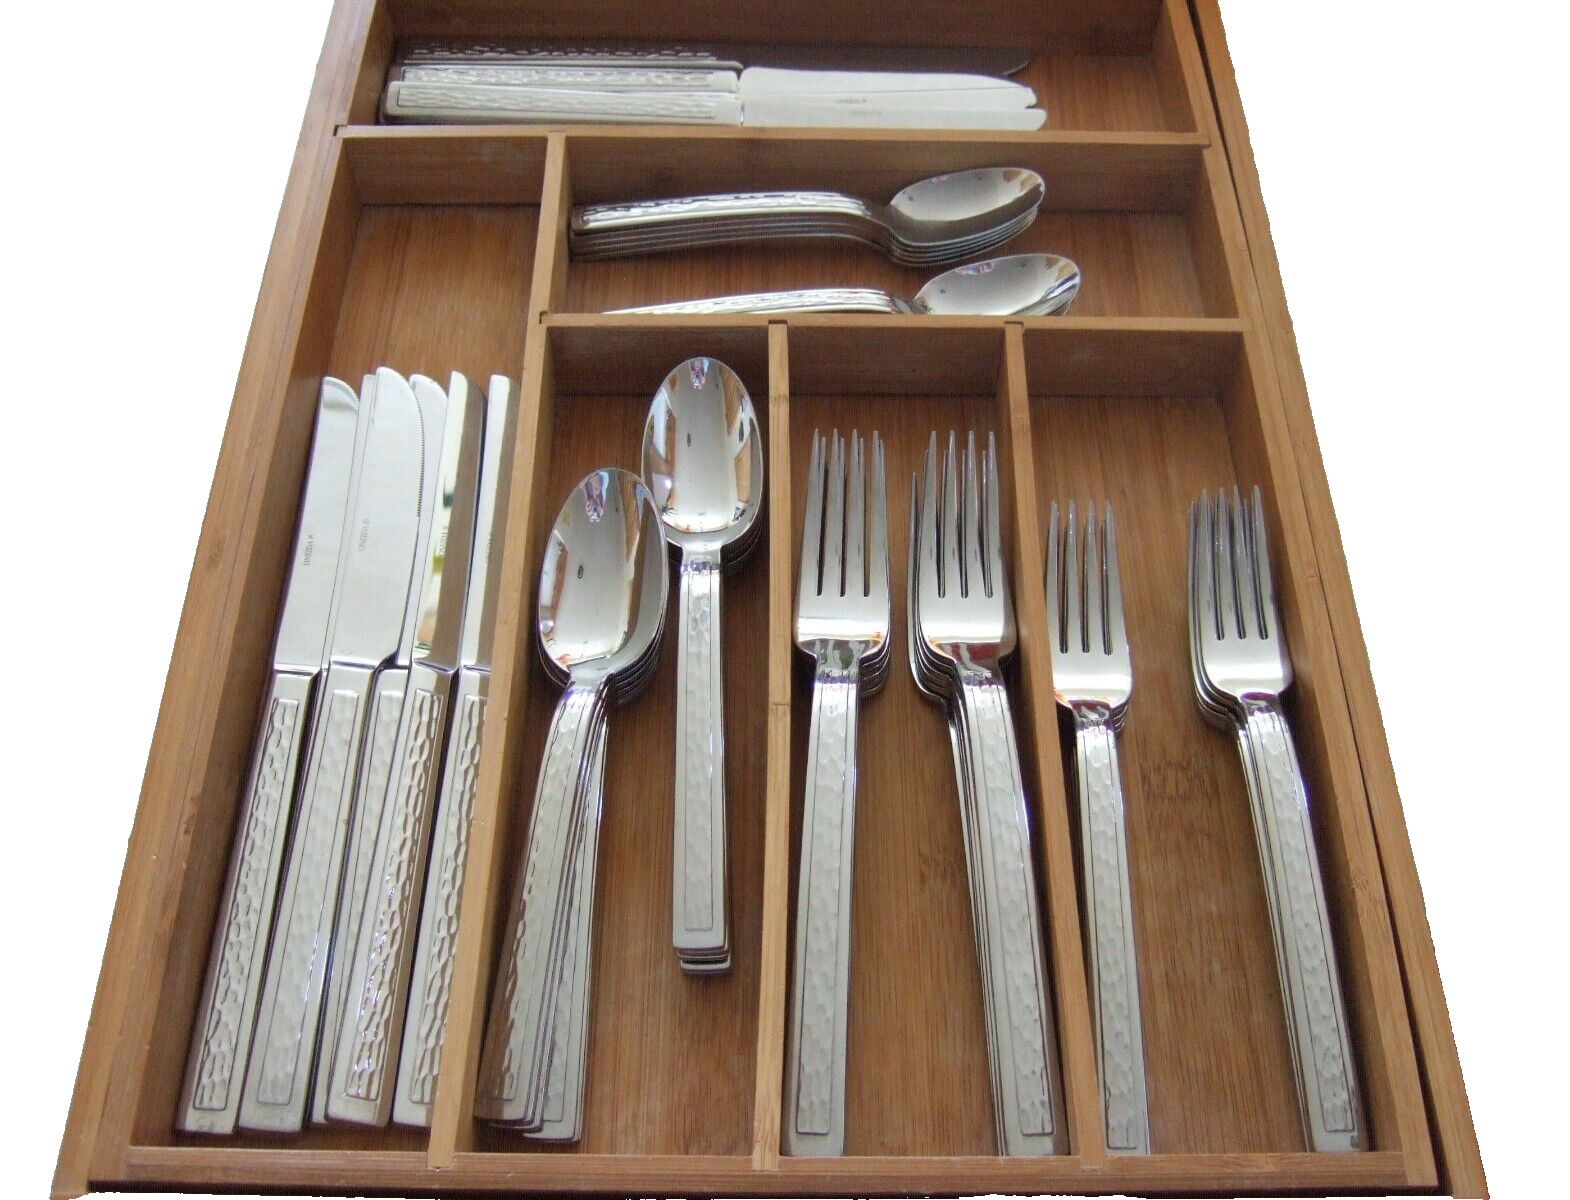 RARE 60 Pc SET COMPLETE SVC FOR 12 ONEIDA OHS504 STAINLESS TEXTURED FLATWARE